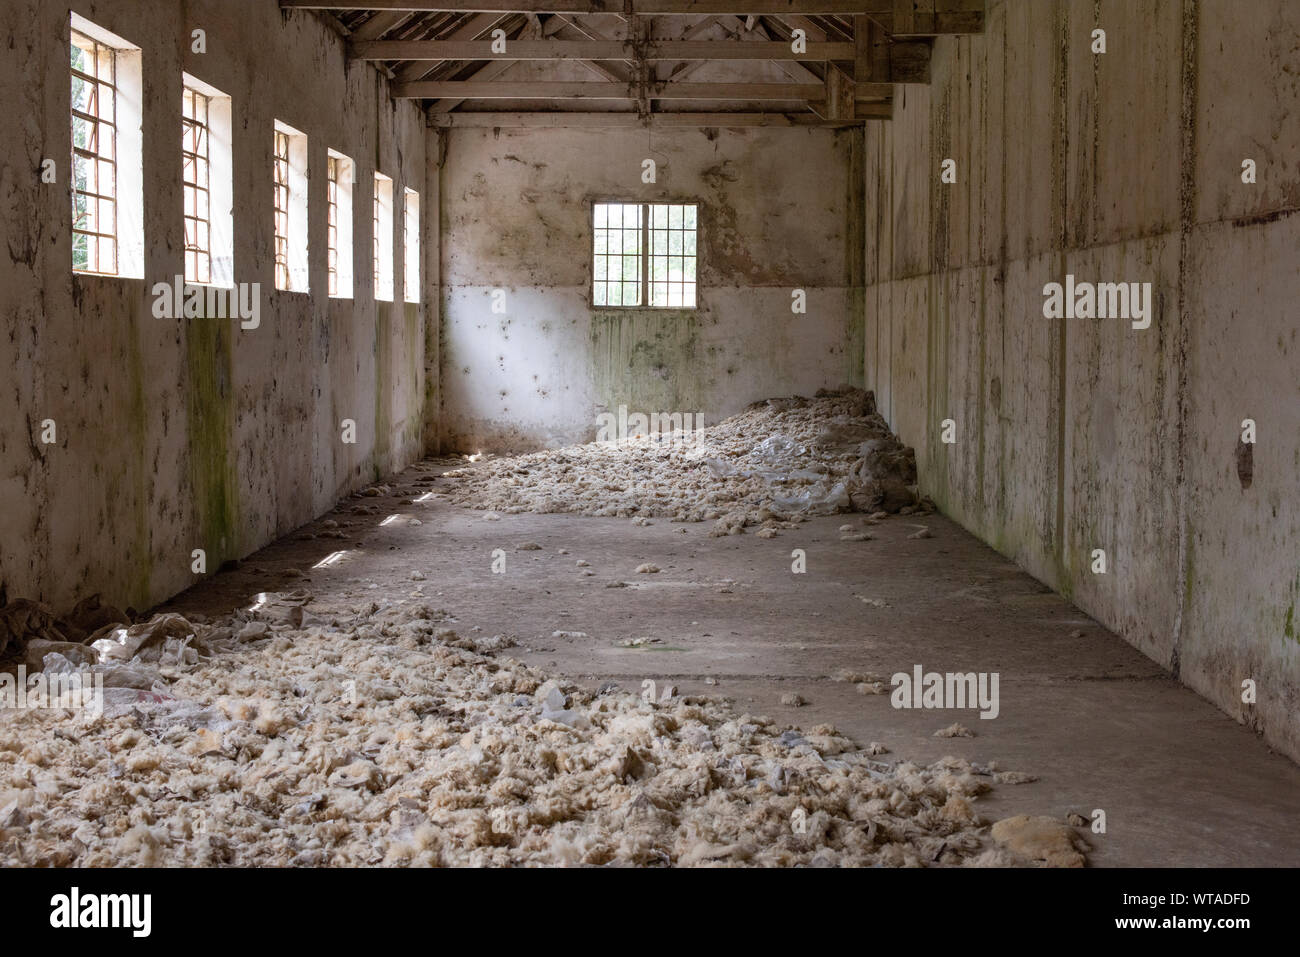 Abandoned slaughter warehouse with sheep wool on the floor Stock Photo